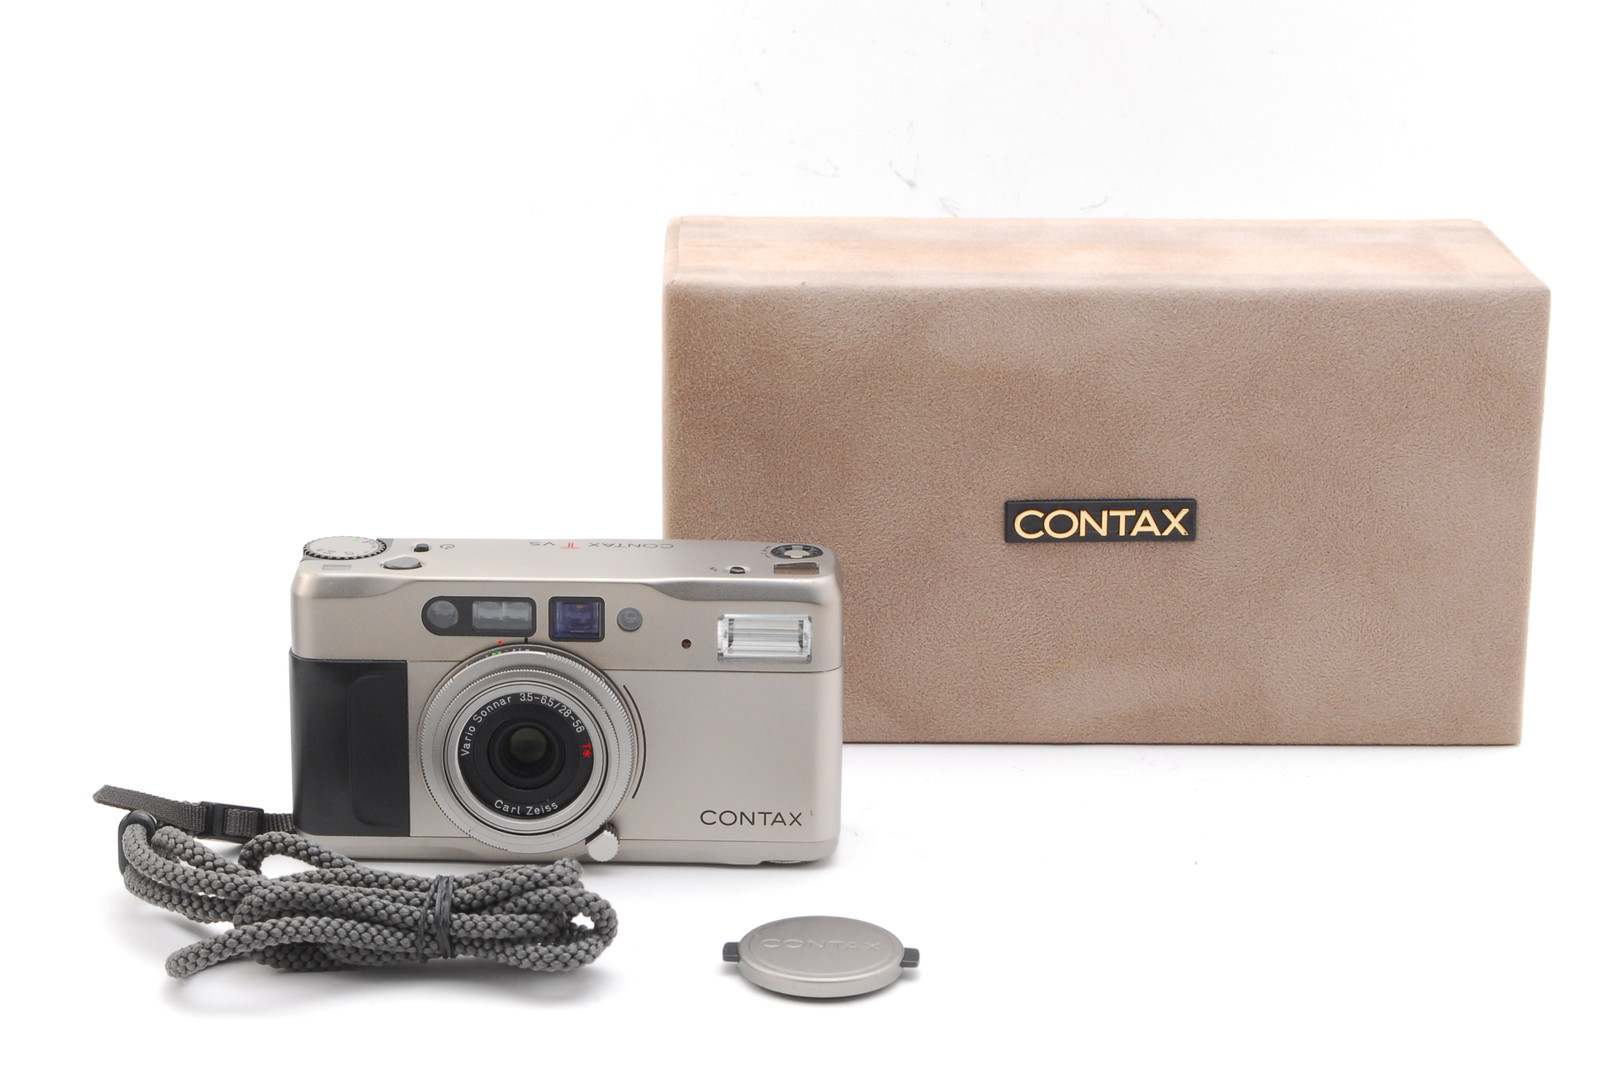 Contax – Products Japan